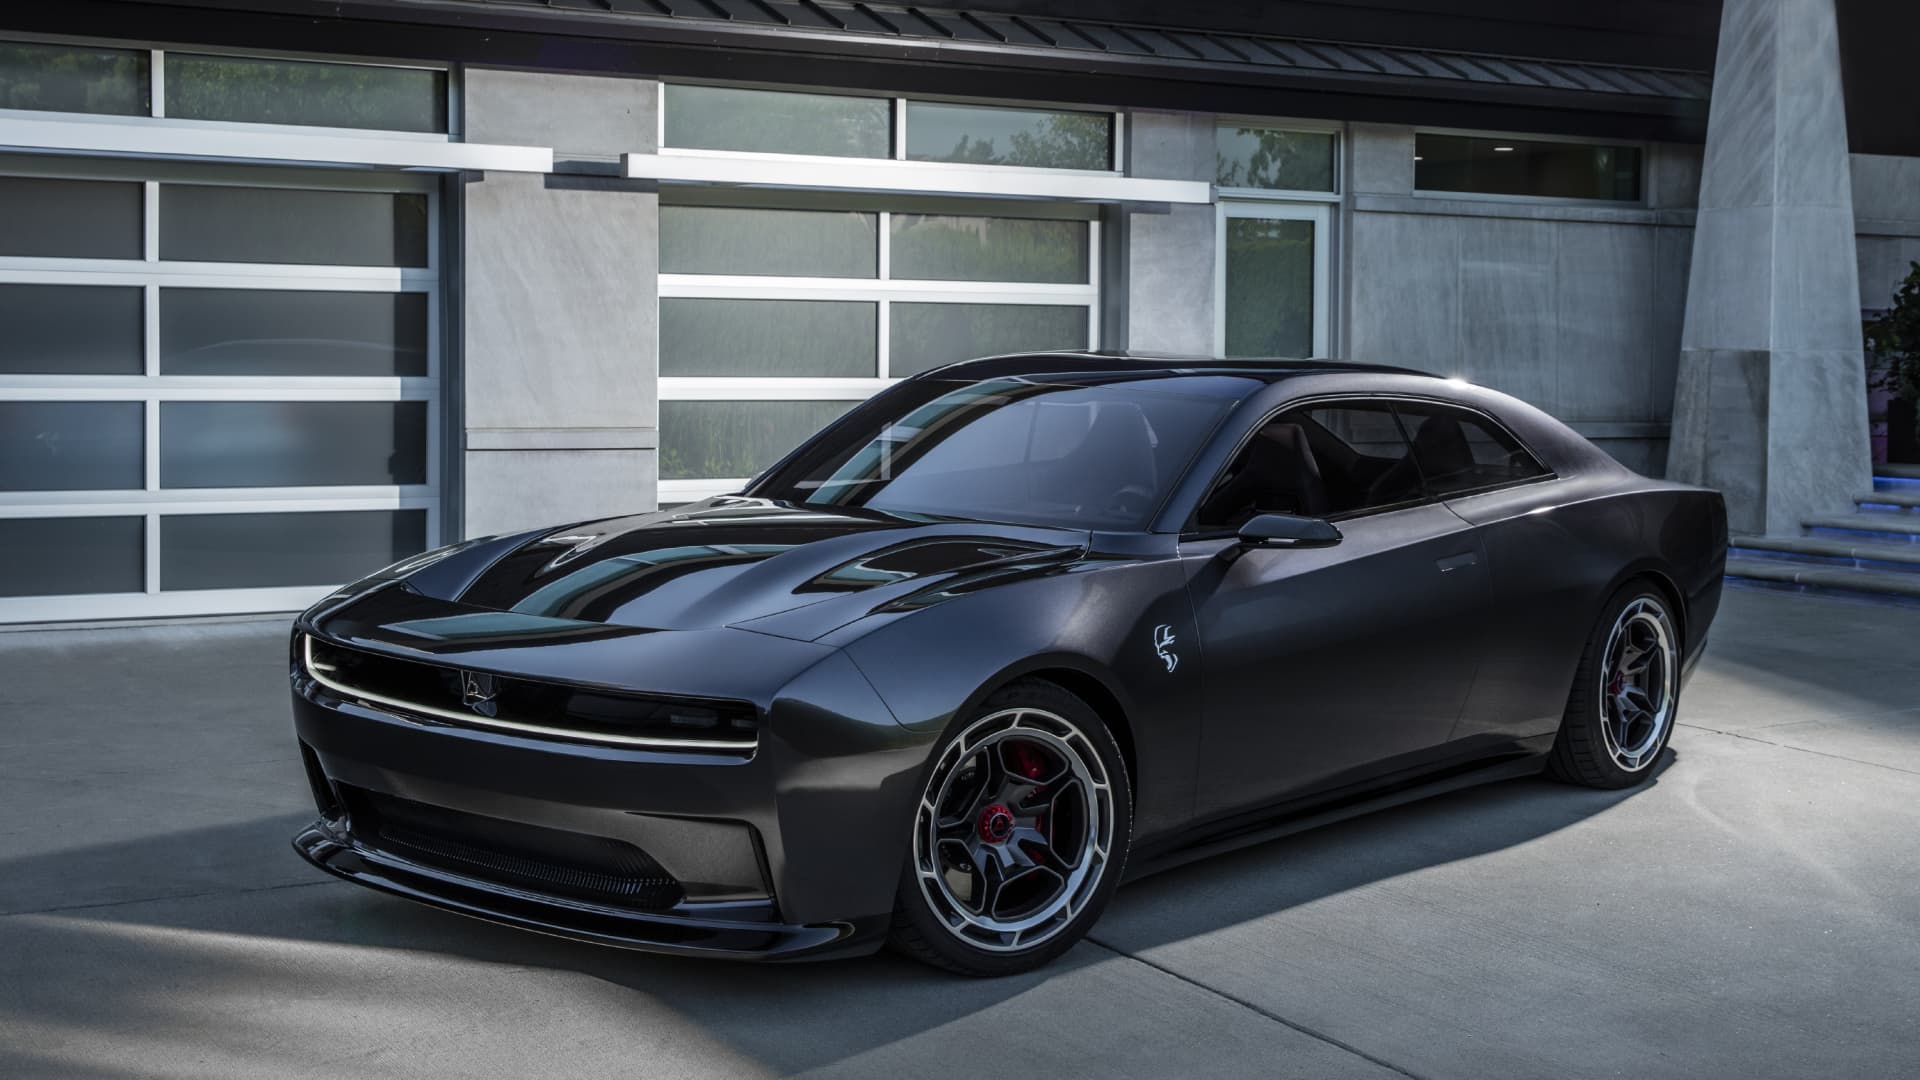 Dodge unveils new electric muscle car concept that could replace the Challenger and Charger